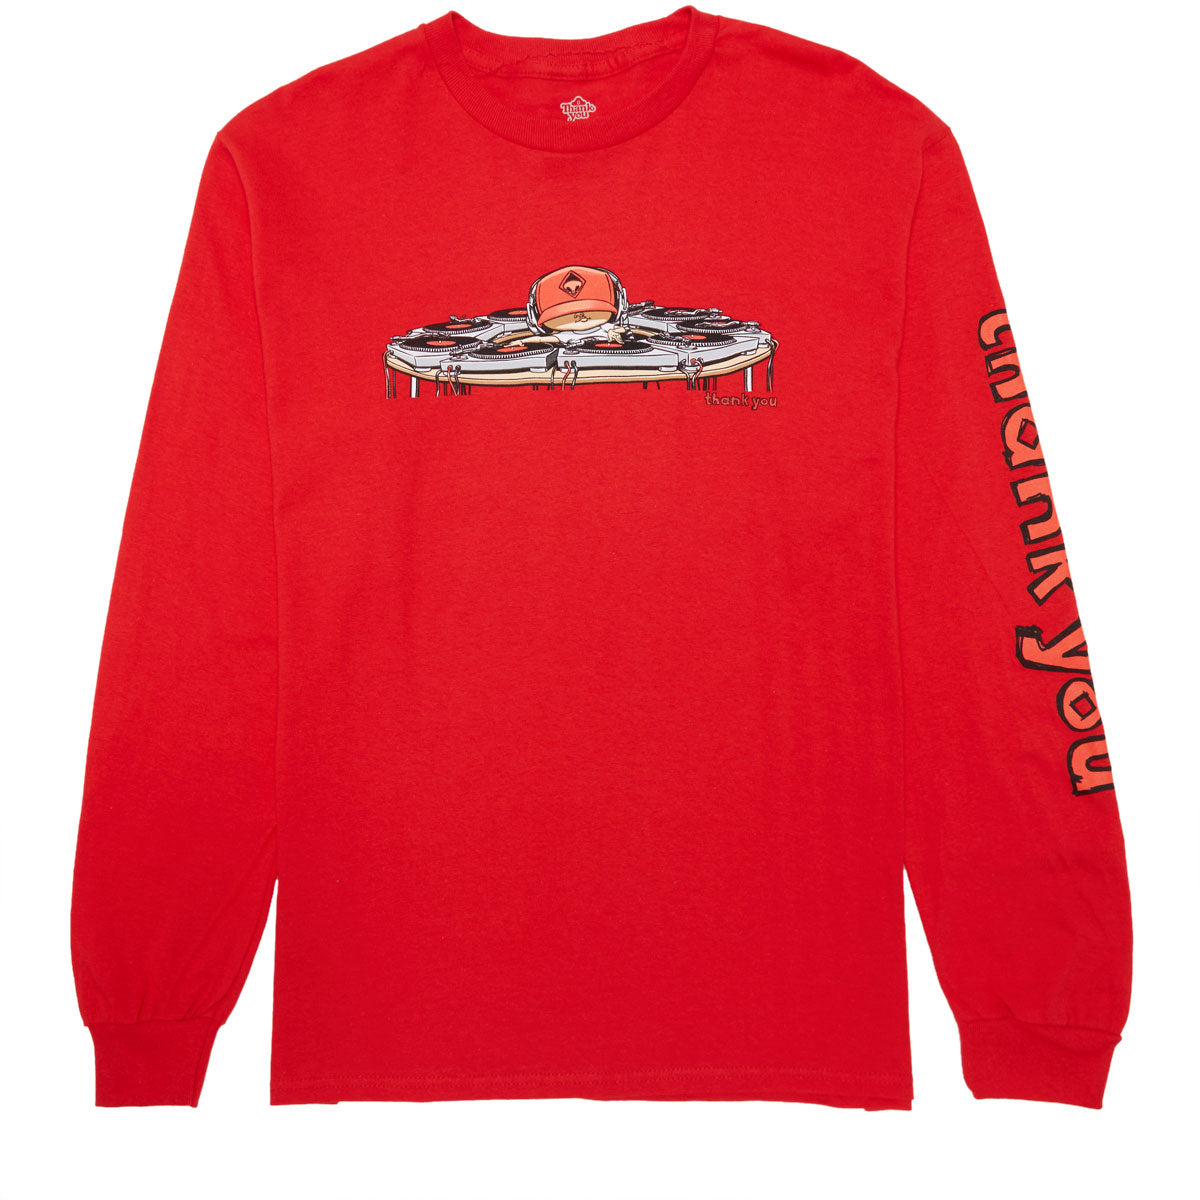 Thank You x Ronnie Creager Mix Master Long Sleeve T-Shirt - Red image 1